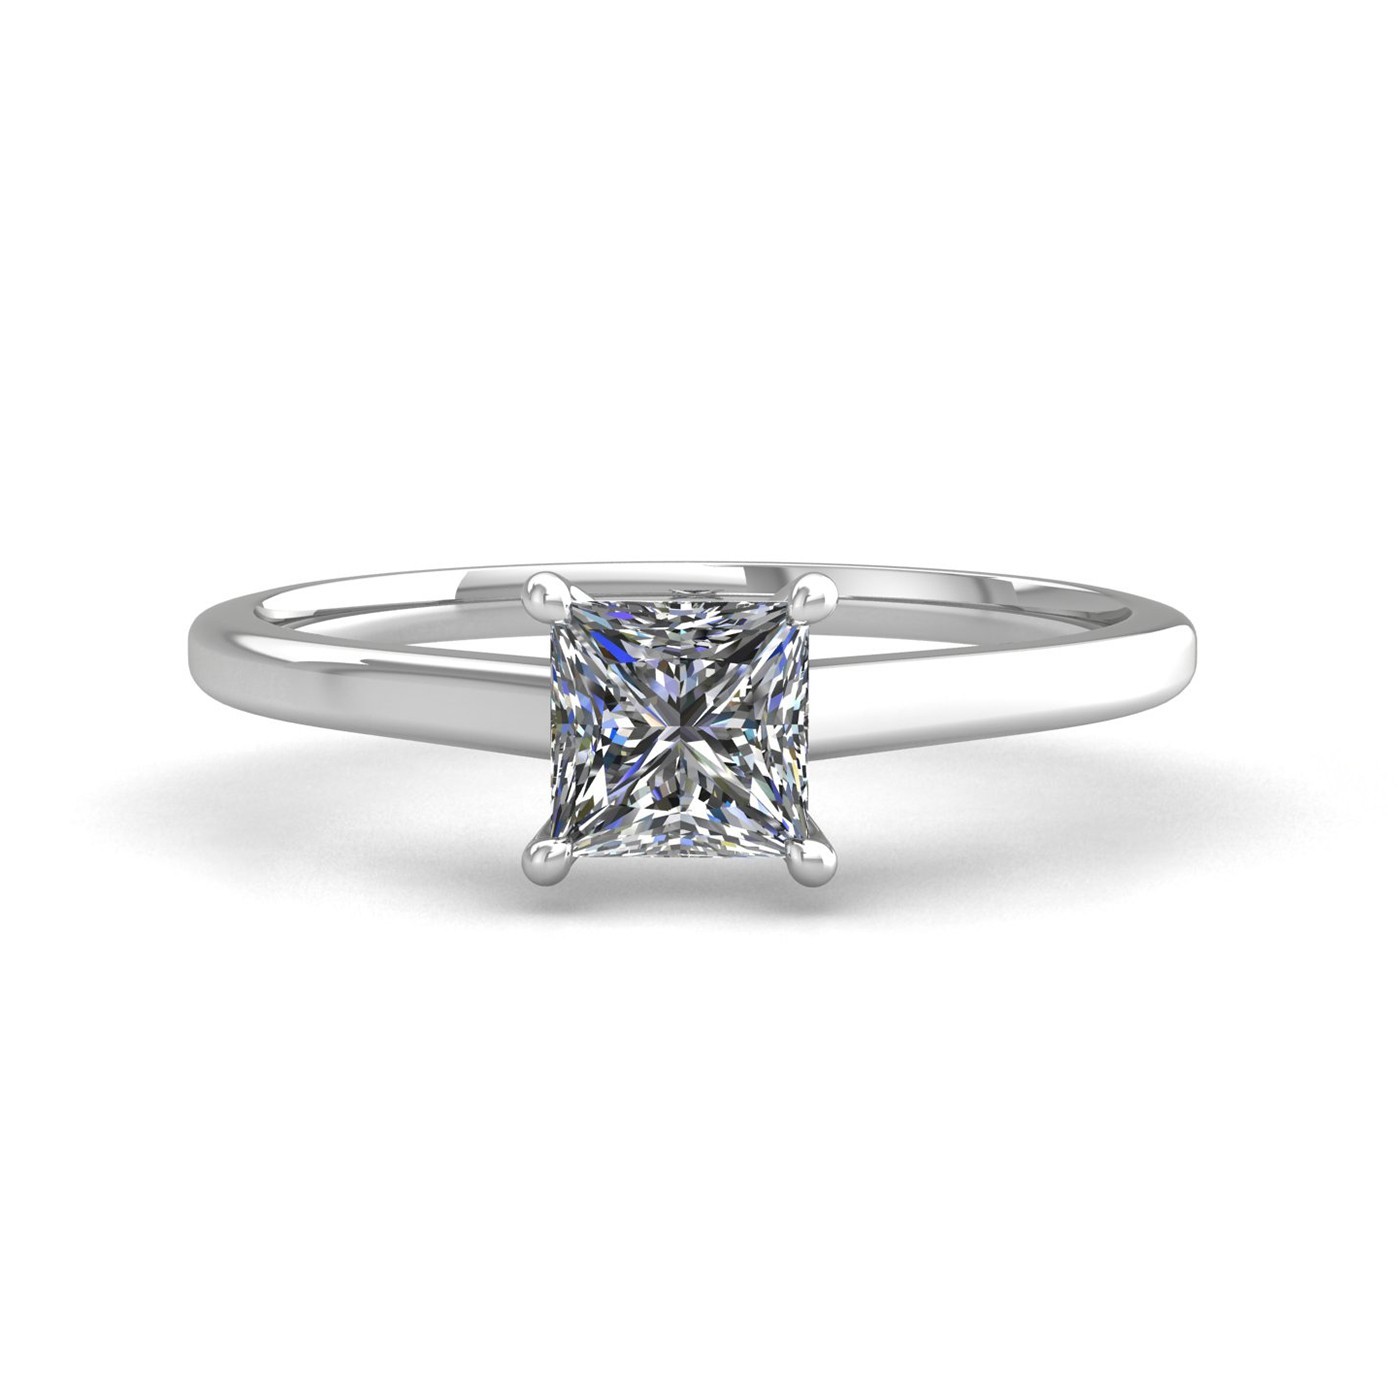 18k white gold  1,20 ct 4 prongs solitaire princess cut diamond engagement ring with whisper thin band Photos & images